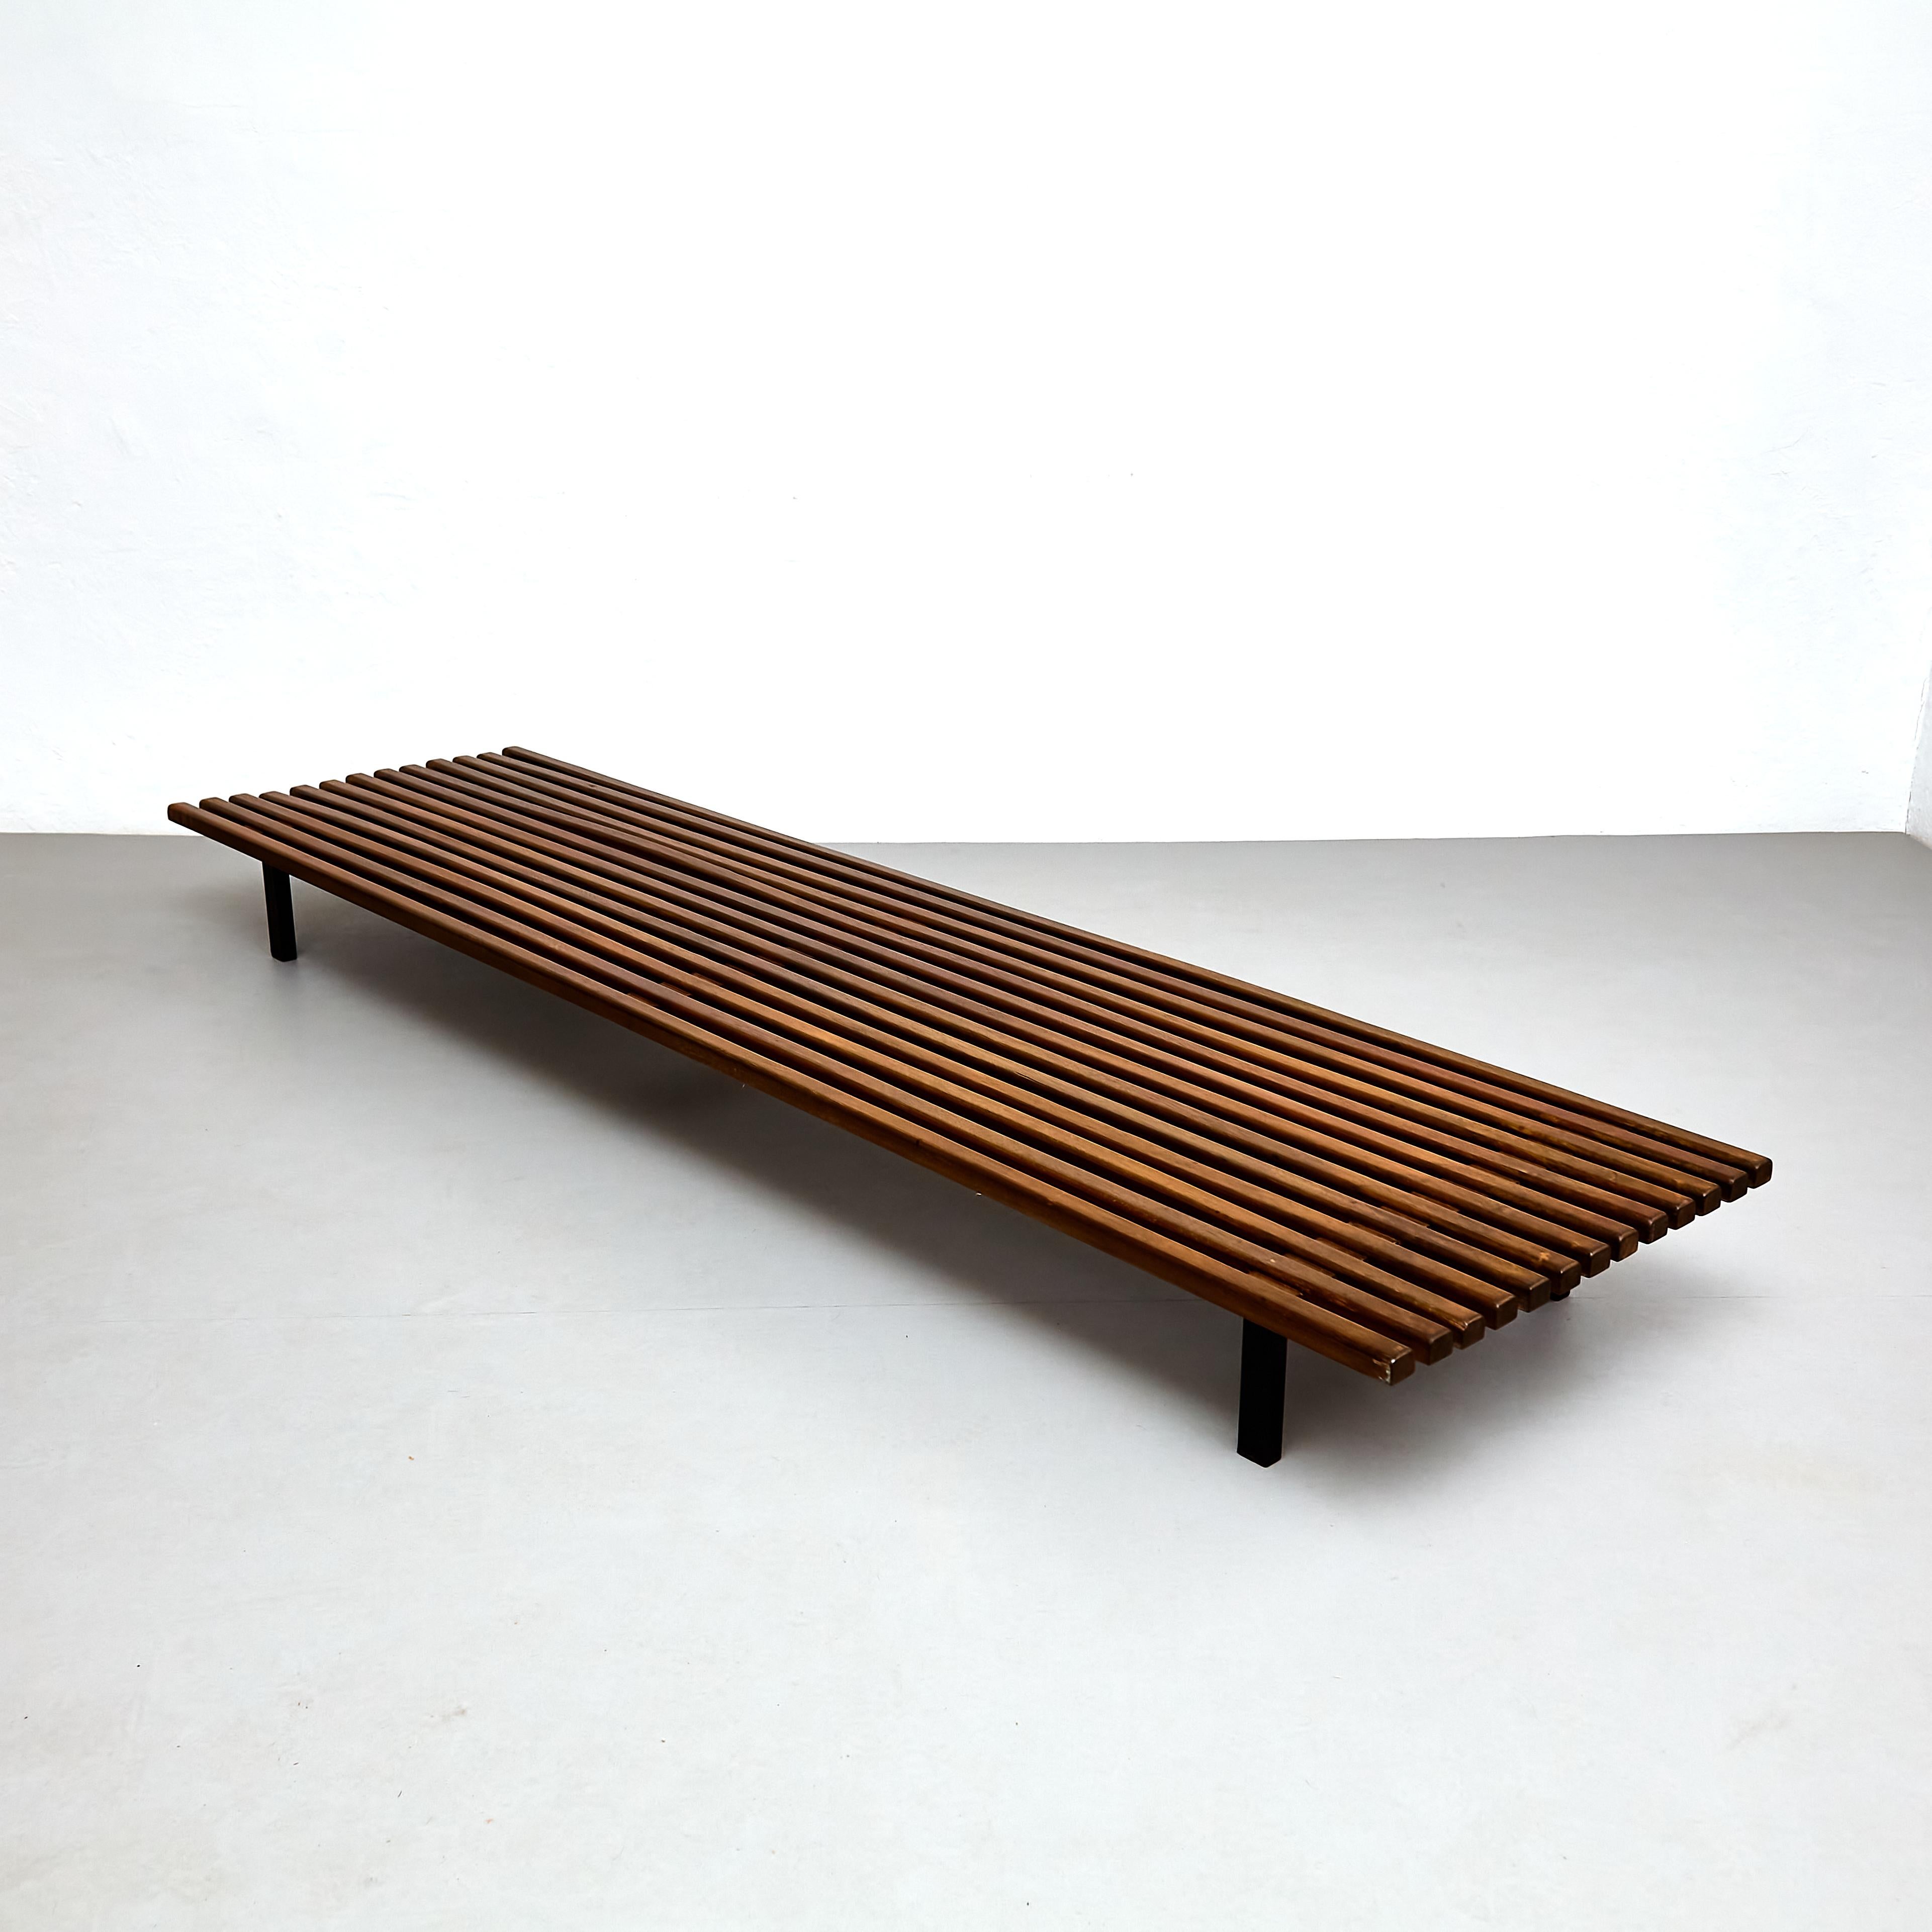 Metal Charlotte Perriand Mid-Century Modern Cansado Bench, circa 1950 For Sale